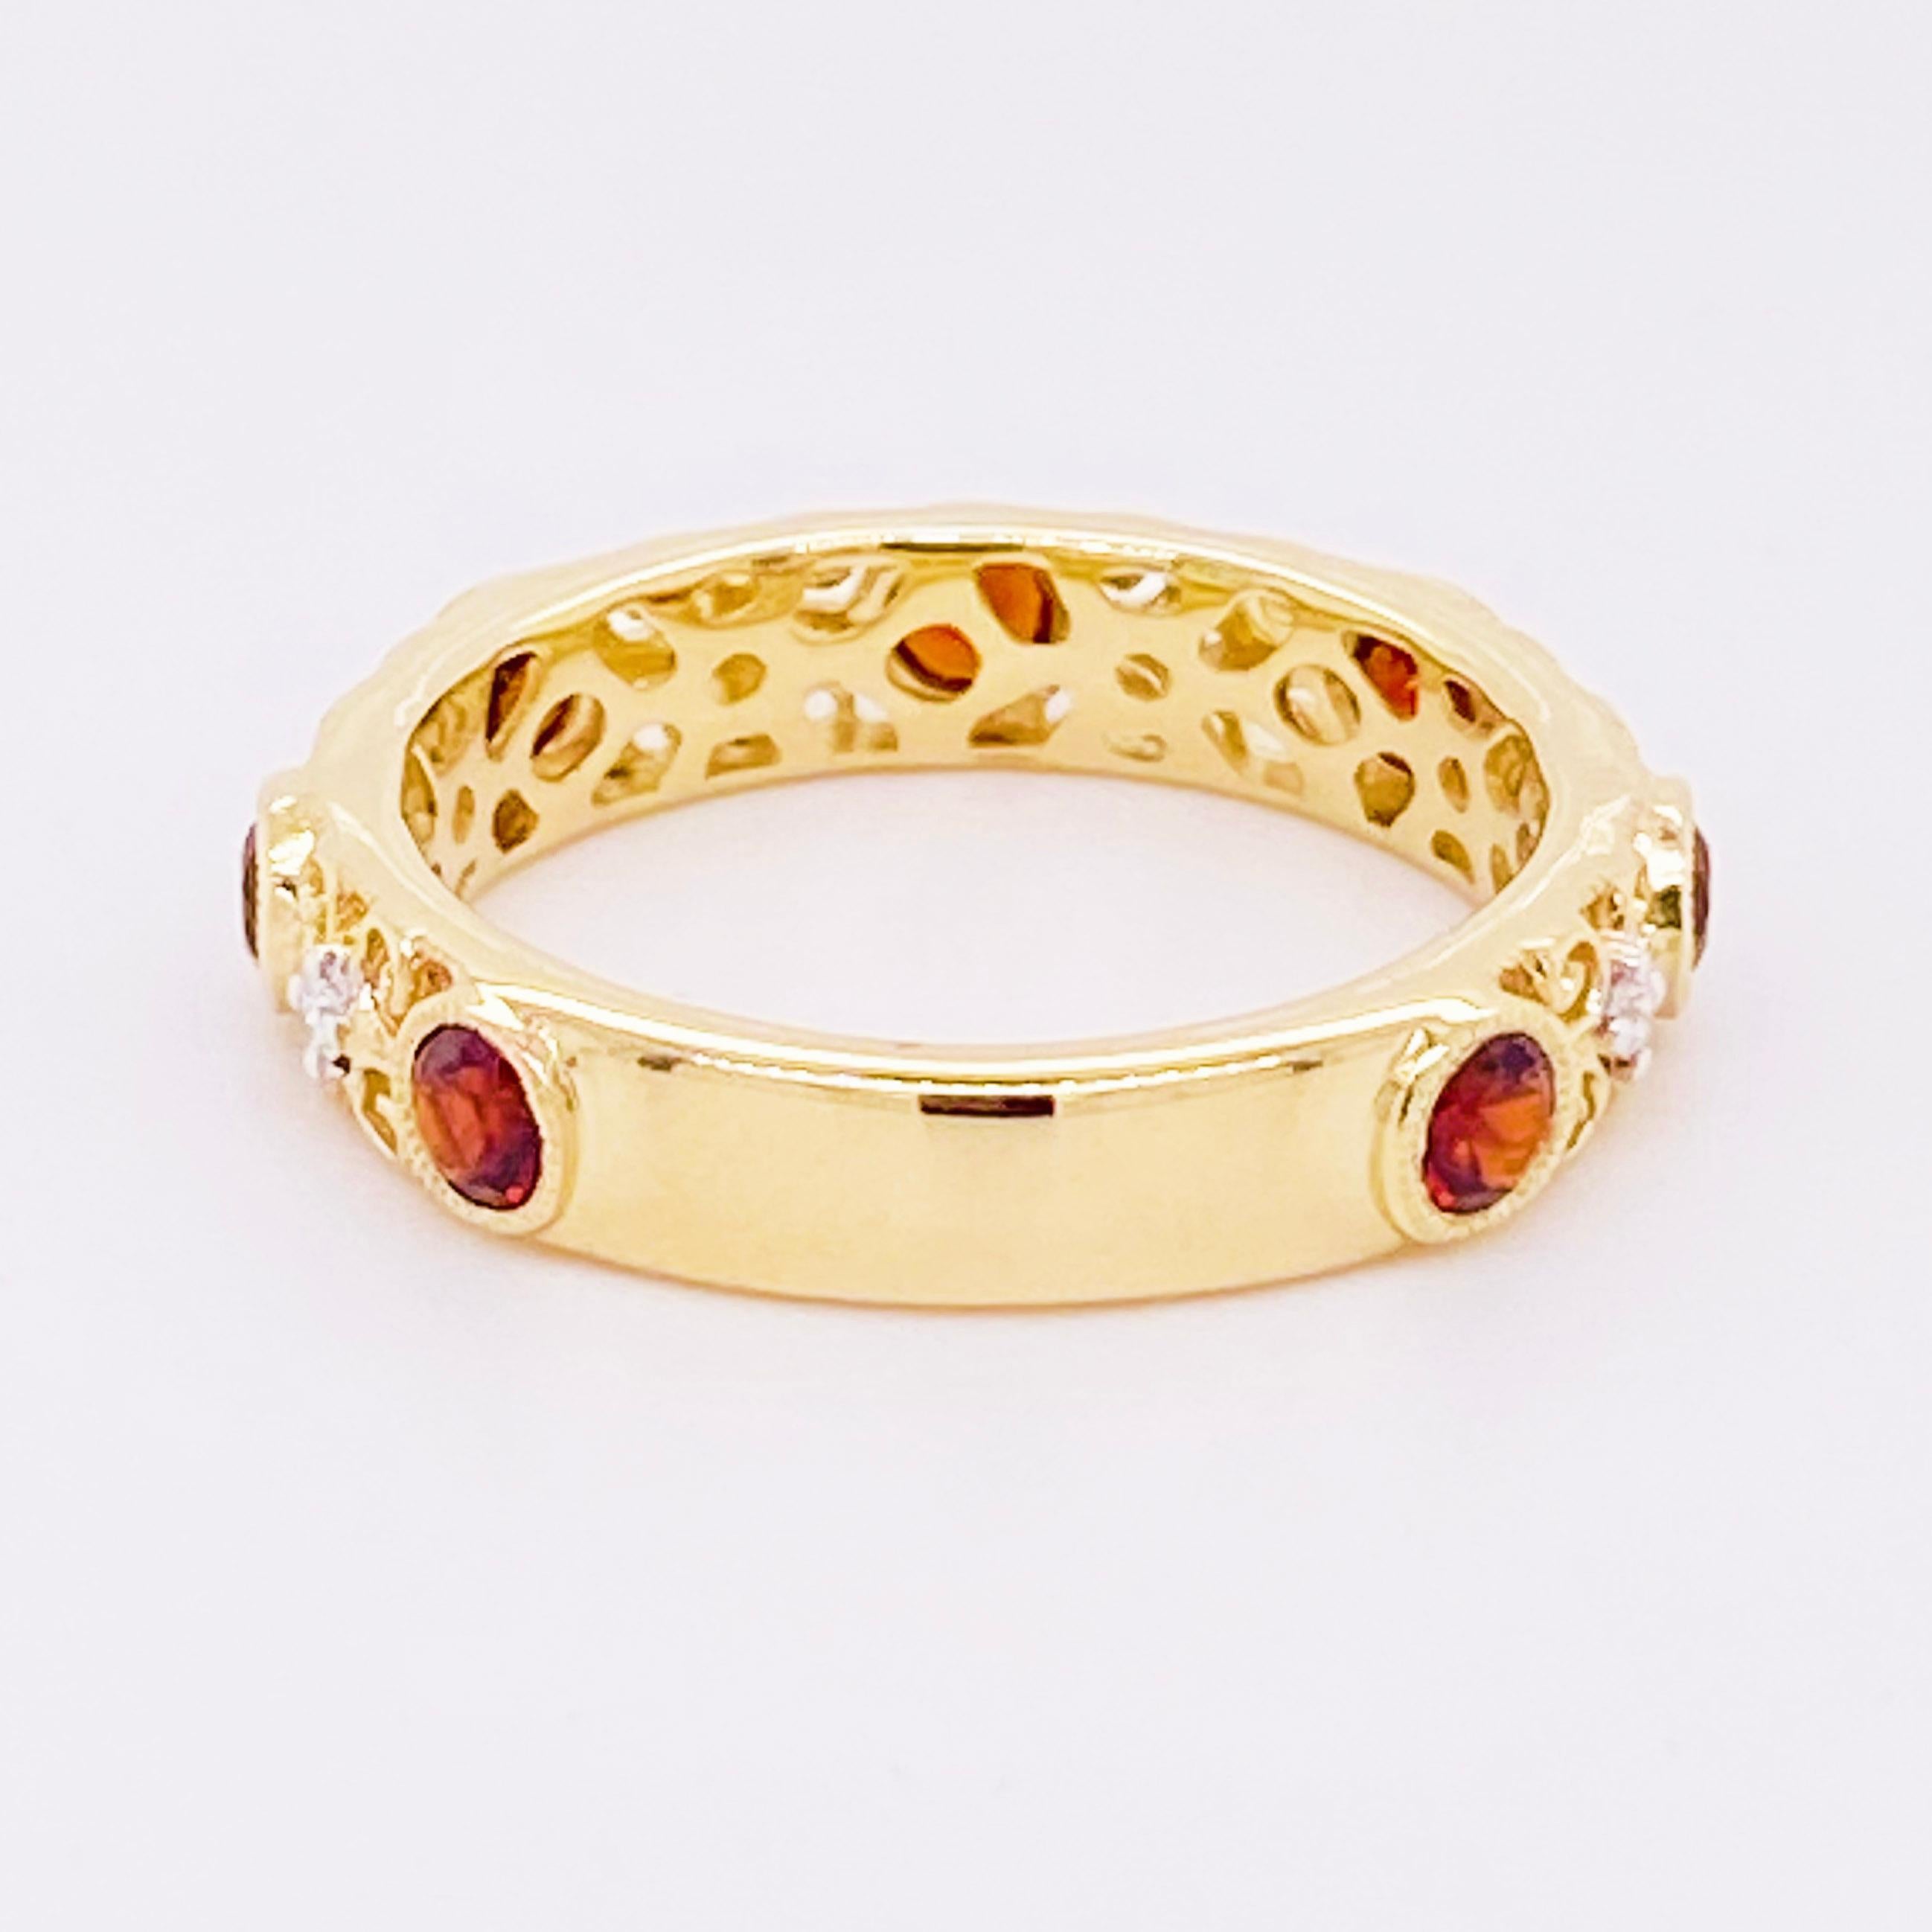 This lovely garnet and diamond band ring has a stunning detailed filigree design! Accented by lovely 14 karat yellow gold, this ring is an amazing fashion band and stackable band!  This pairs well with most engagement rings and wedding bands as